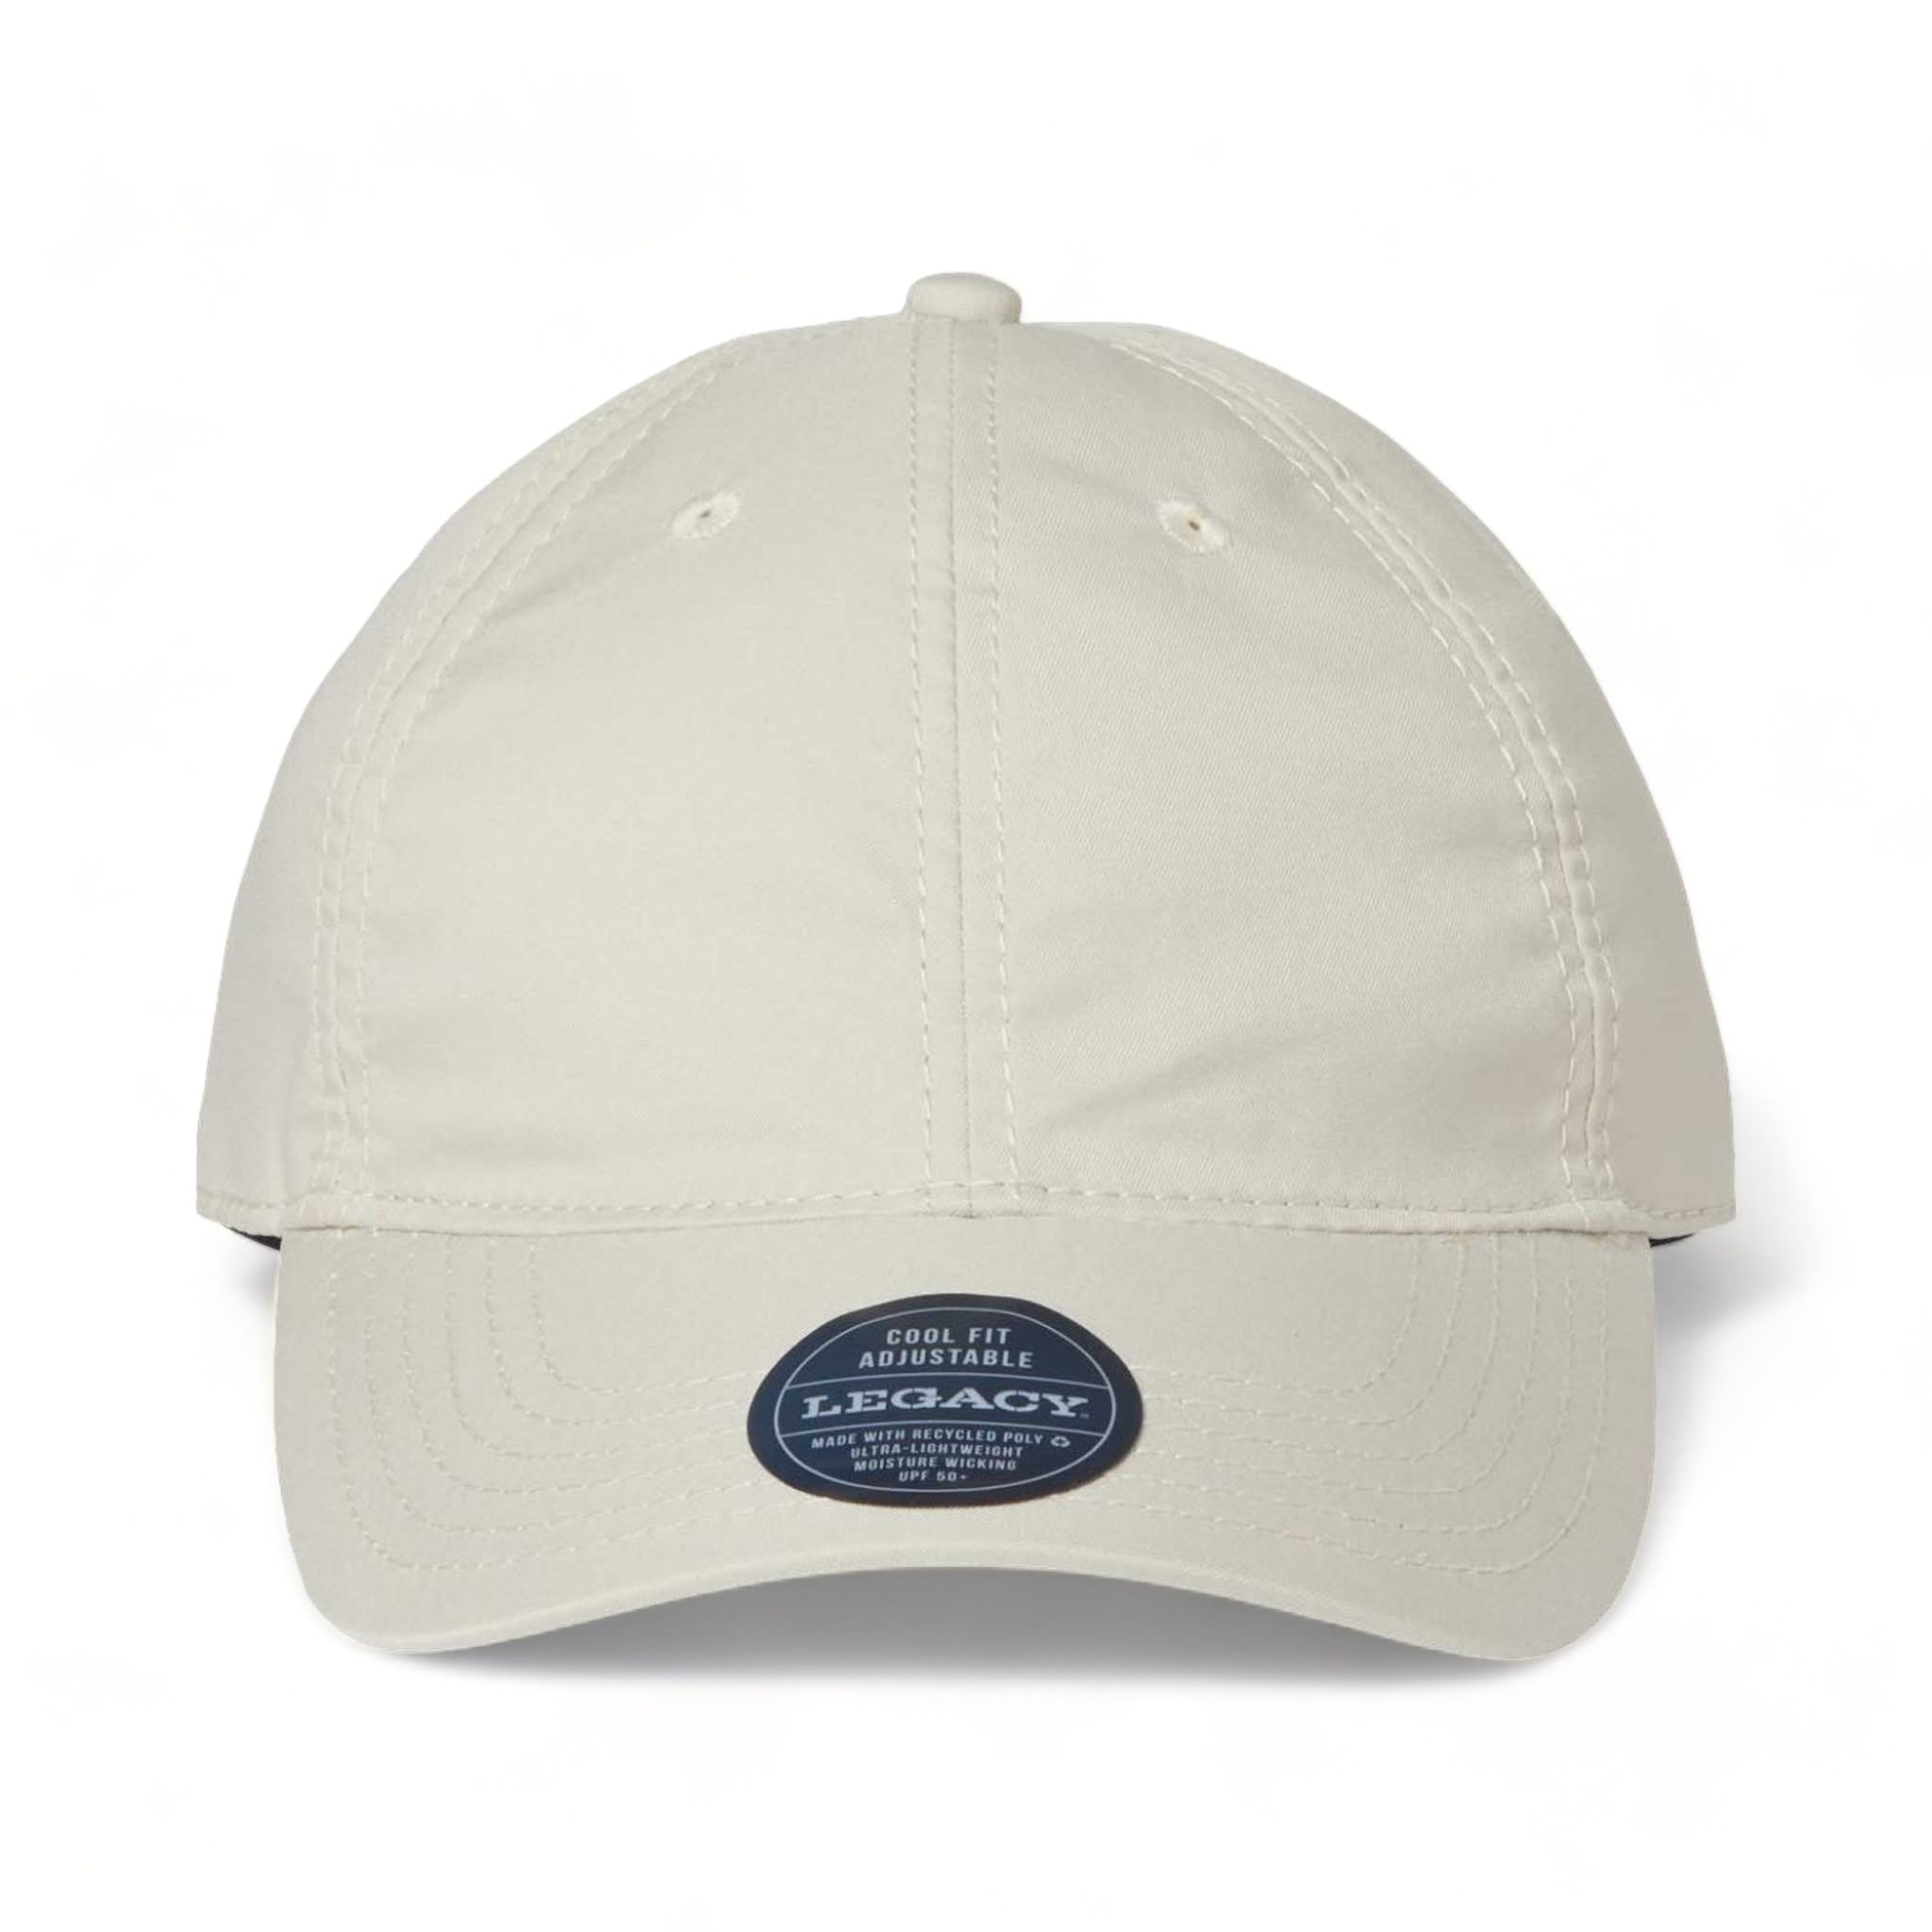 Front view of LEGACY CFA custom hat in stone